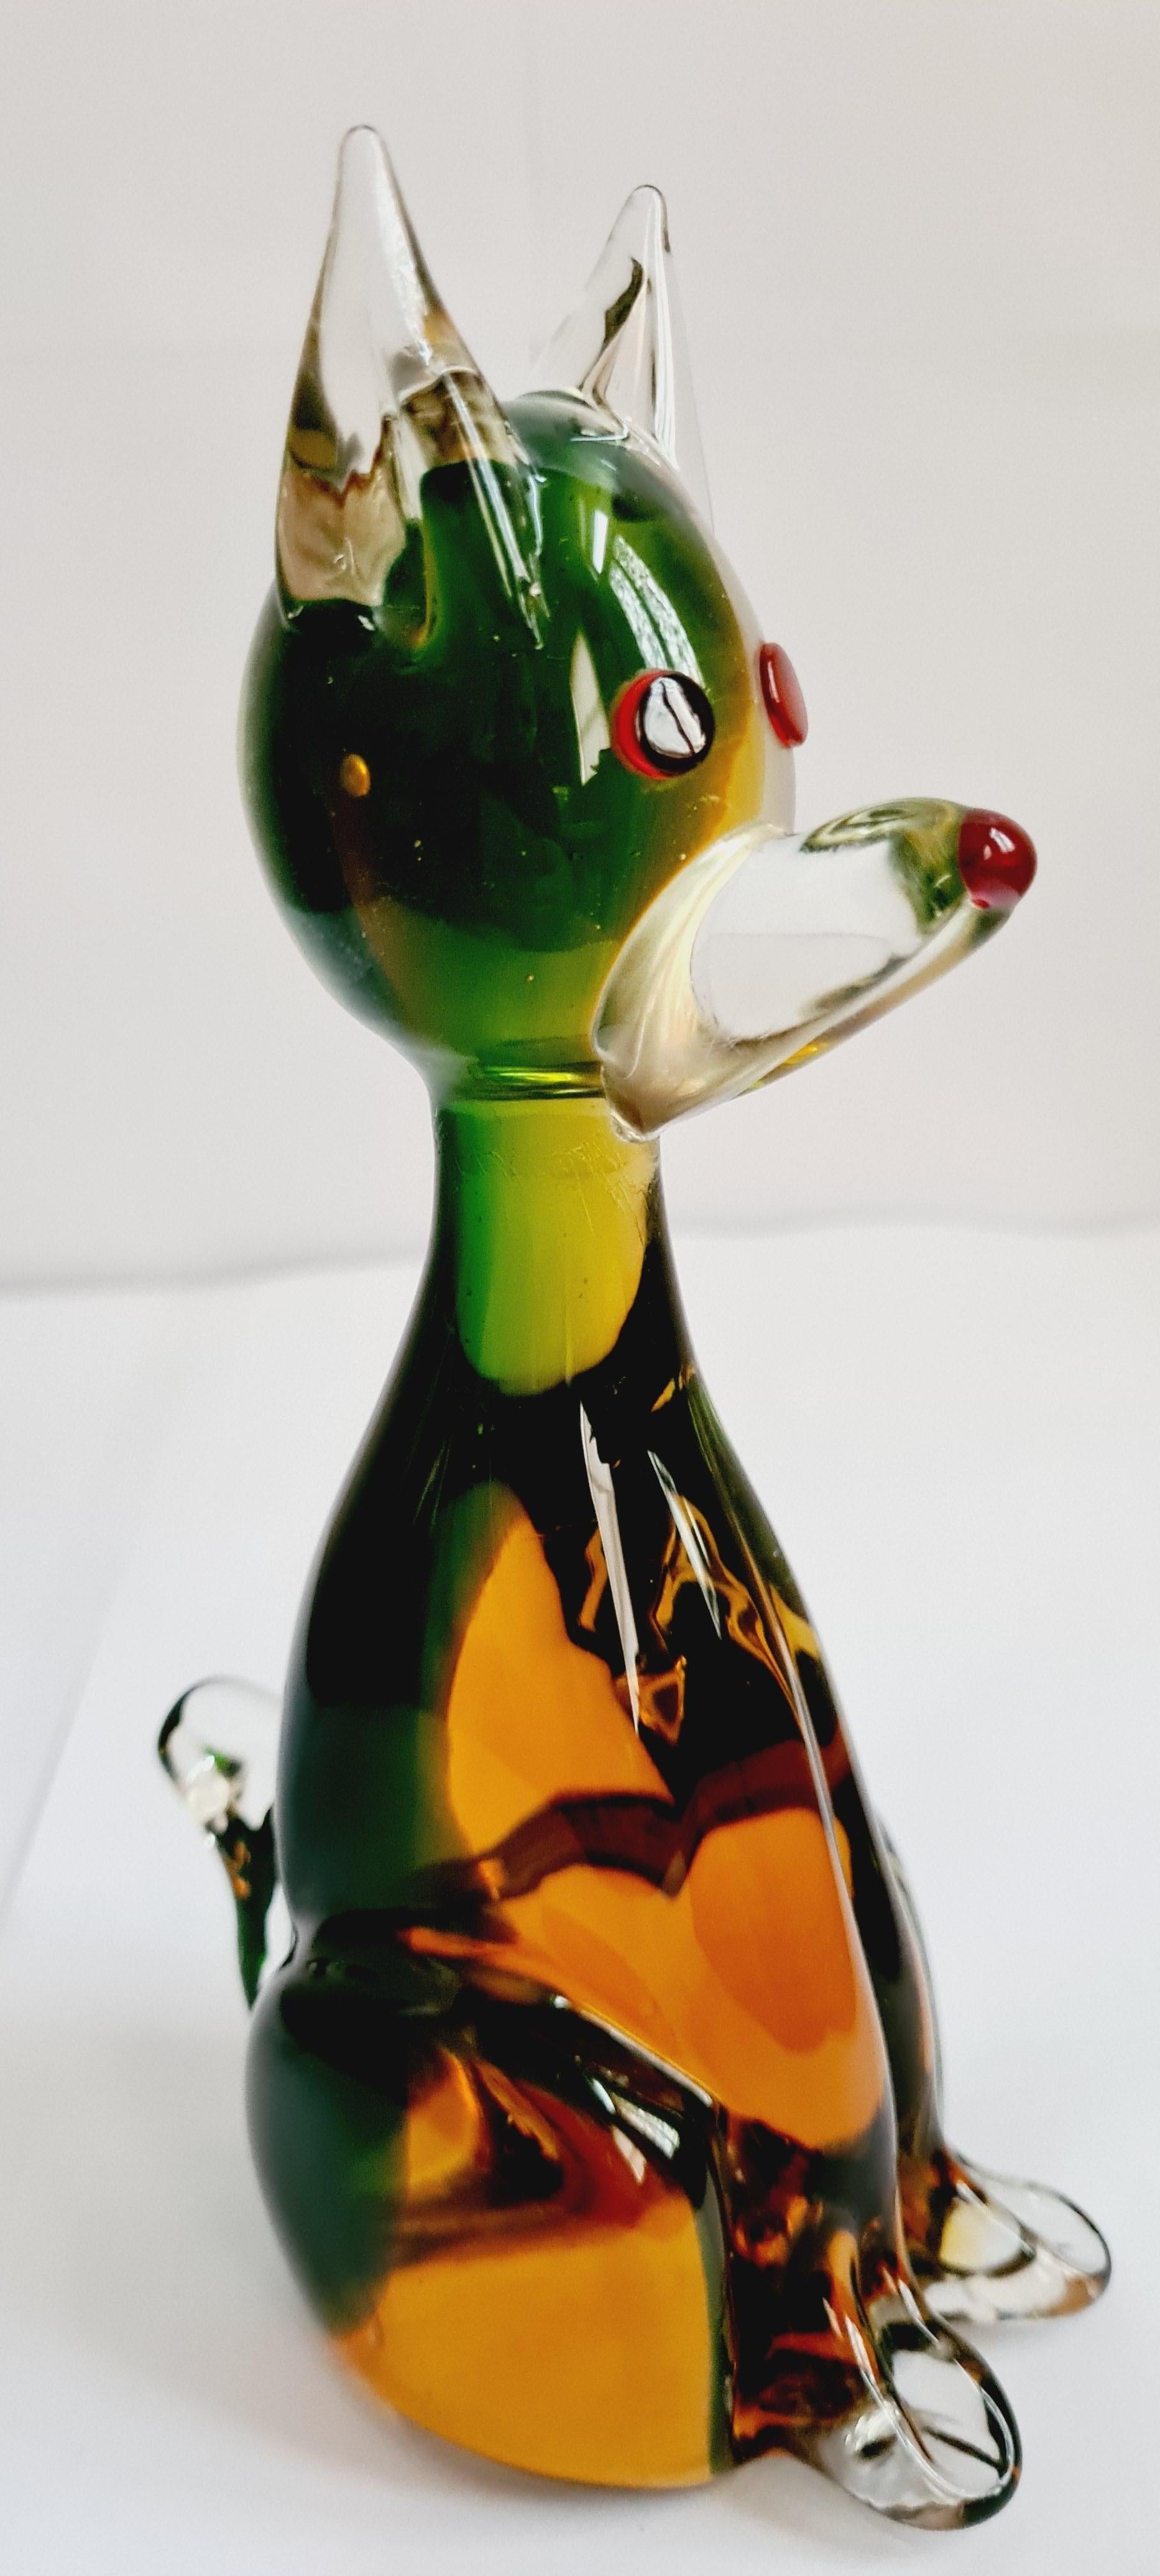 Beautiful Murano green/amber organic sommerso glass dog figurine in green, organic amber, red and clear; attributed to Antonio Da Ros for Vetri Cenedese. In excellent condition.